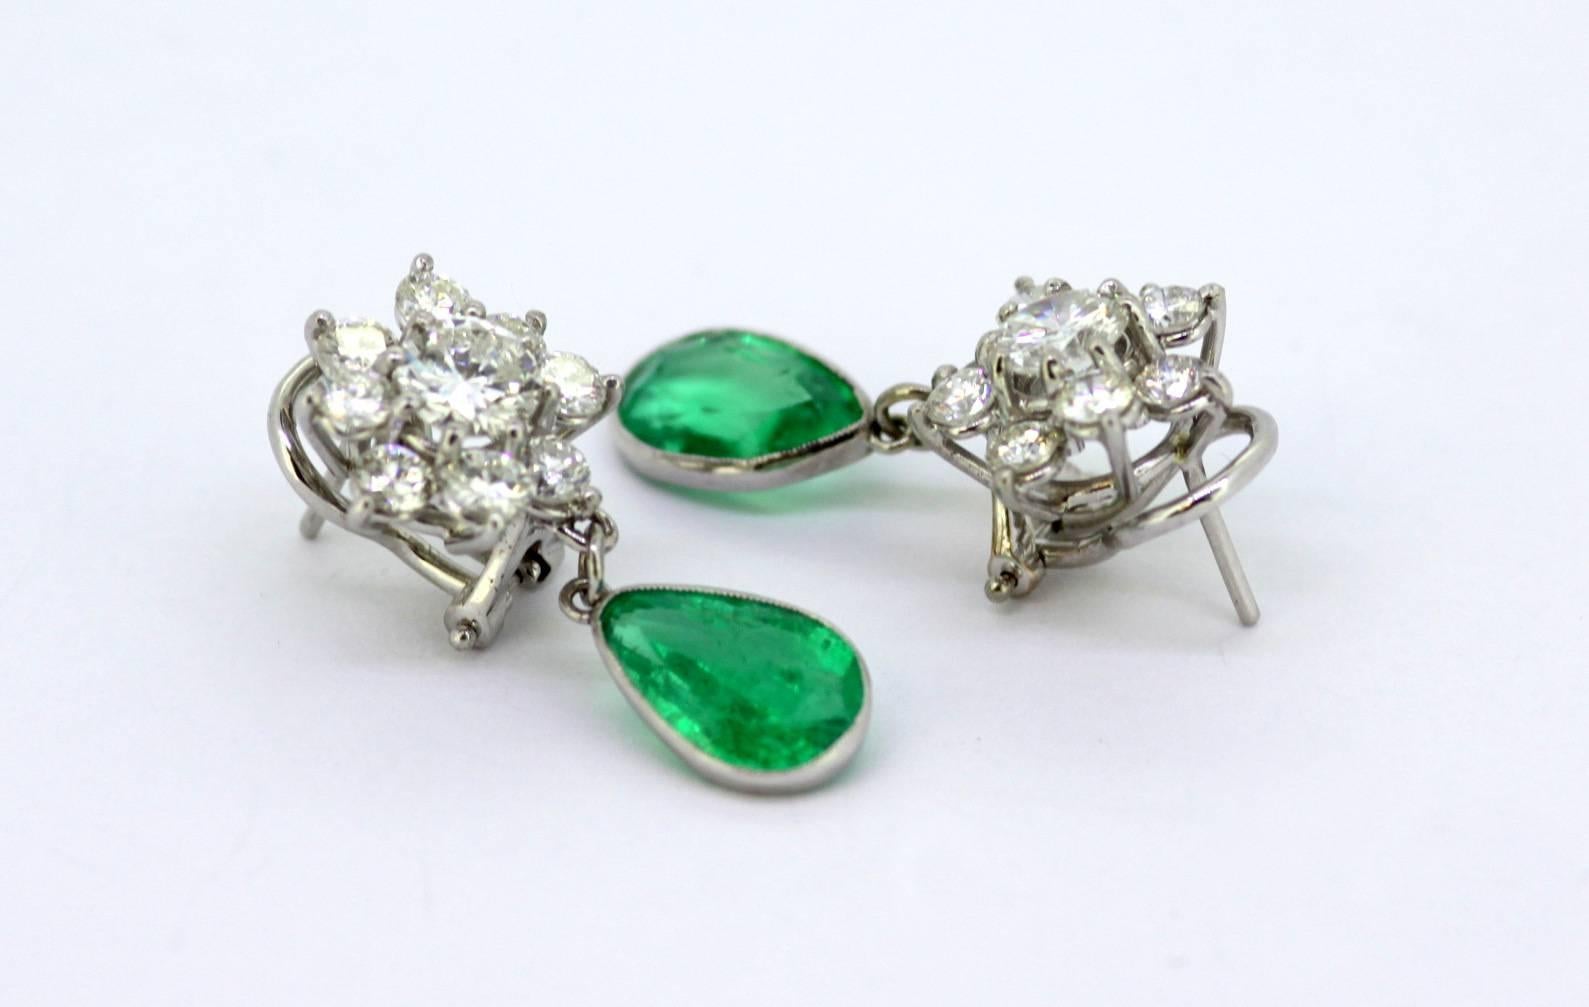 18 Karat White Gold Ladies Clip-On Earrings with Diamonds and Emerald 2